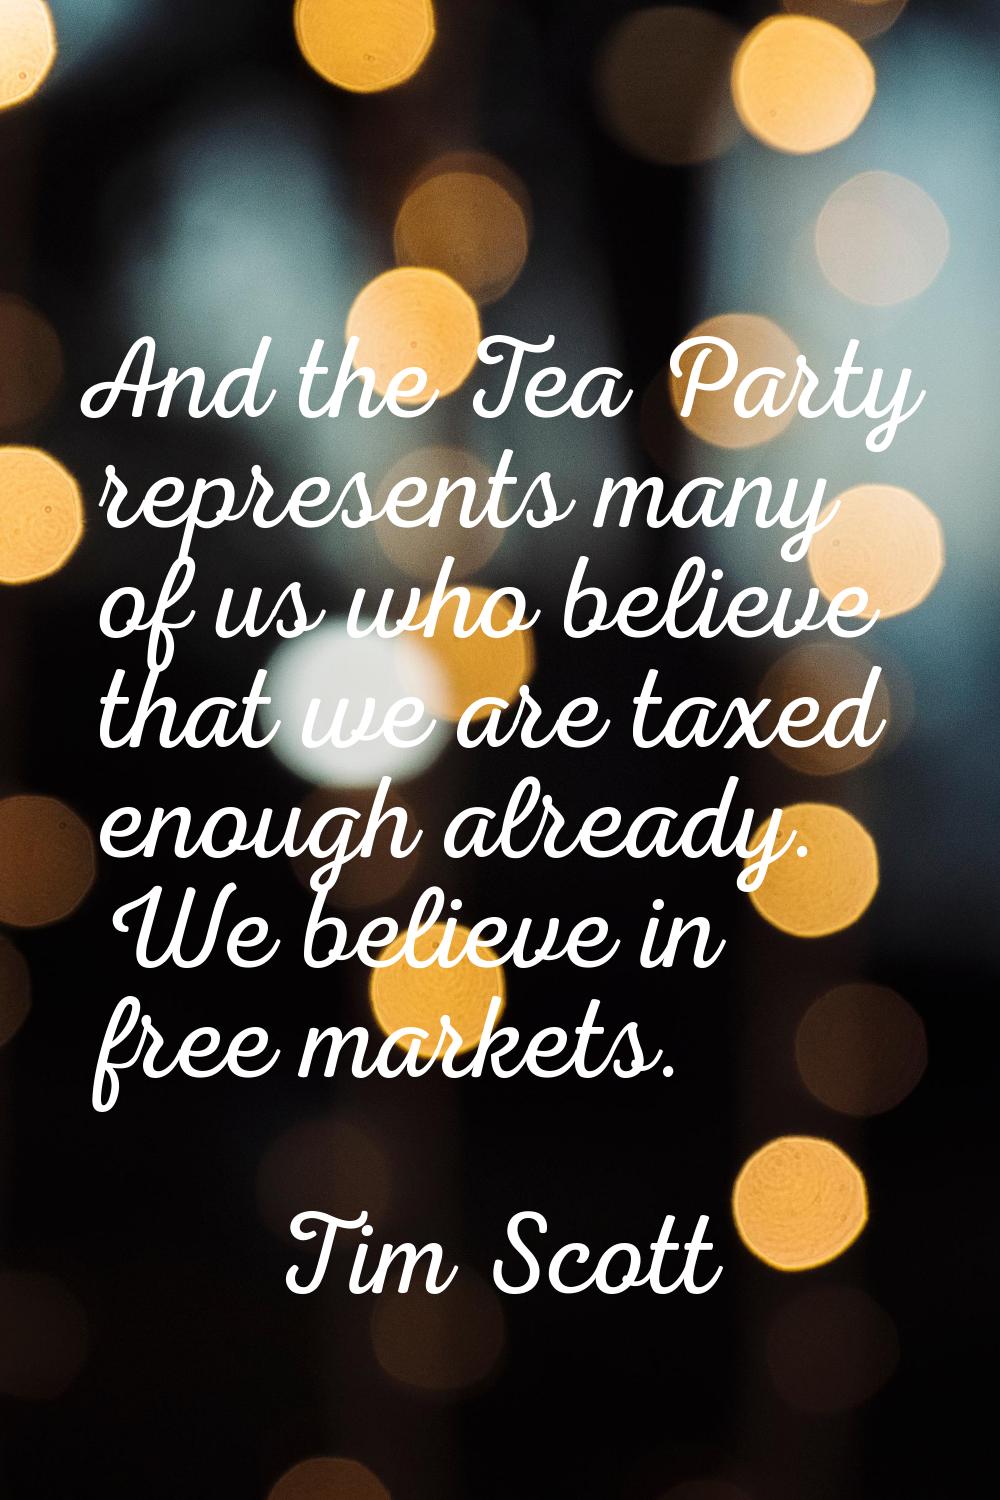 And the Tea Party represents many of us who believe that we are taxed enough already. We believe in